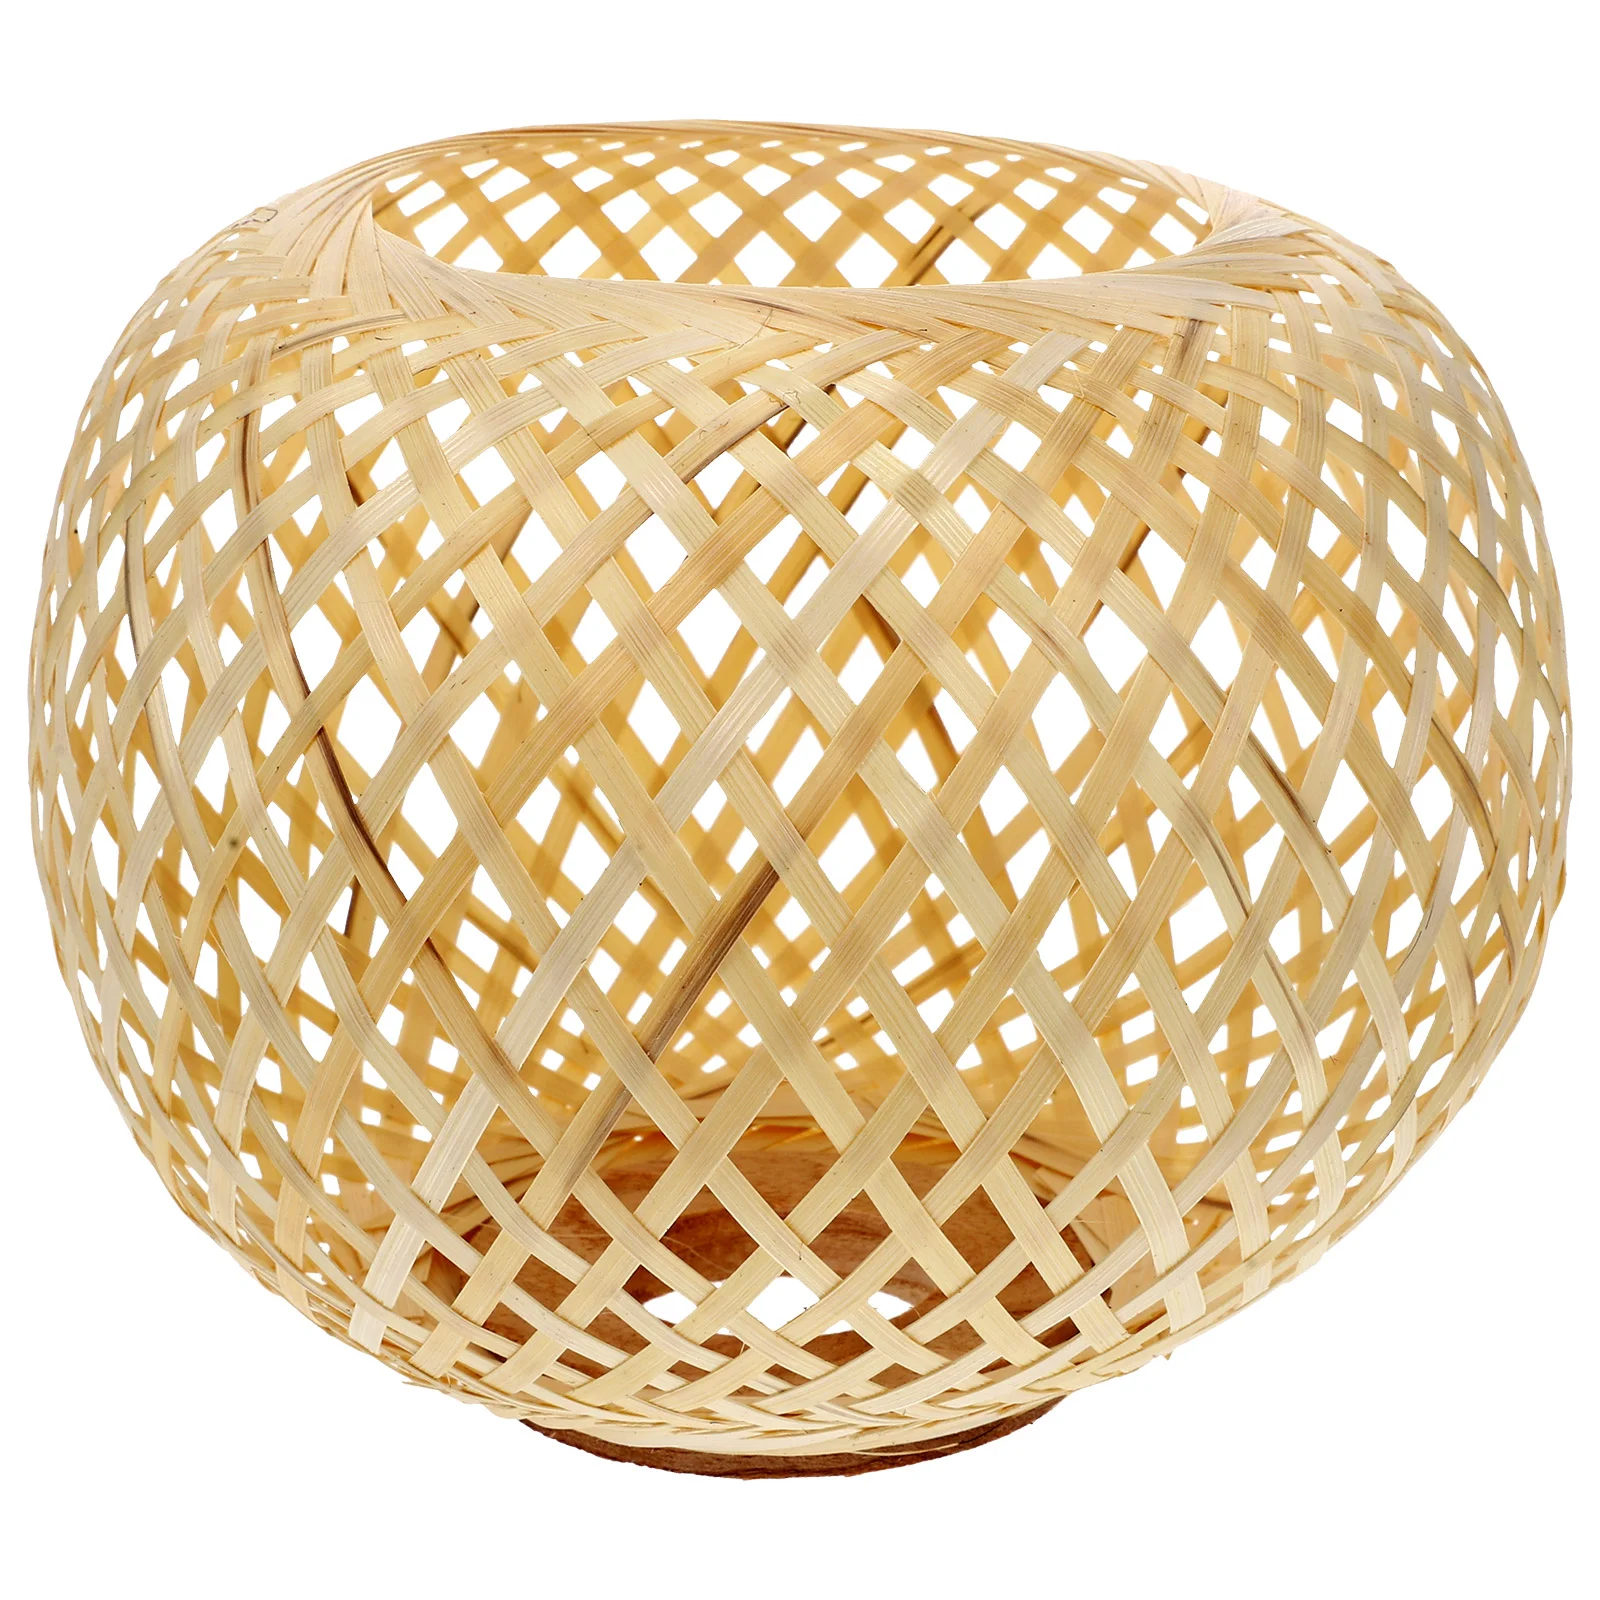 Woven Bamboo Lampshade Light Bulb Cage Guard Rattan Basket Chandelier Lamp Shade Light Cover 3pcs bamboo fruit basket handmade woven food serving storage container rustic decorative round rattan bread trays snack bowl